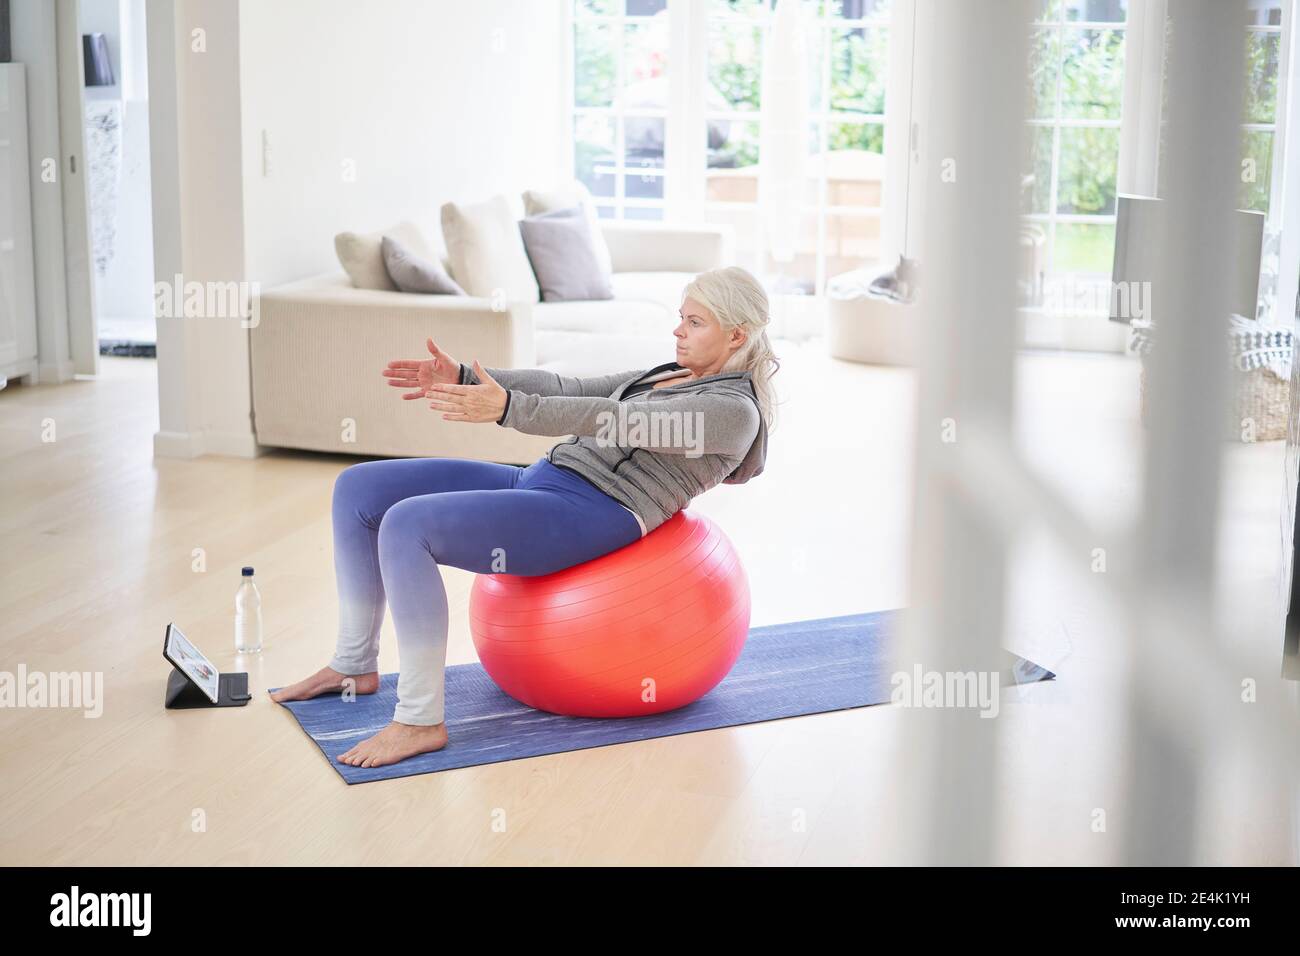 Senior woman exercising on fitness ball while learning from online tutorial through digital tablet at home Stock Photo